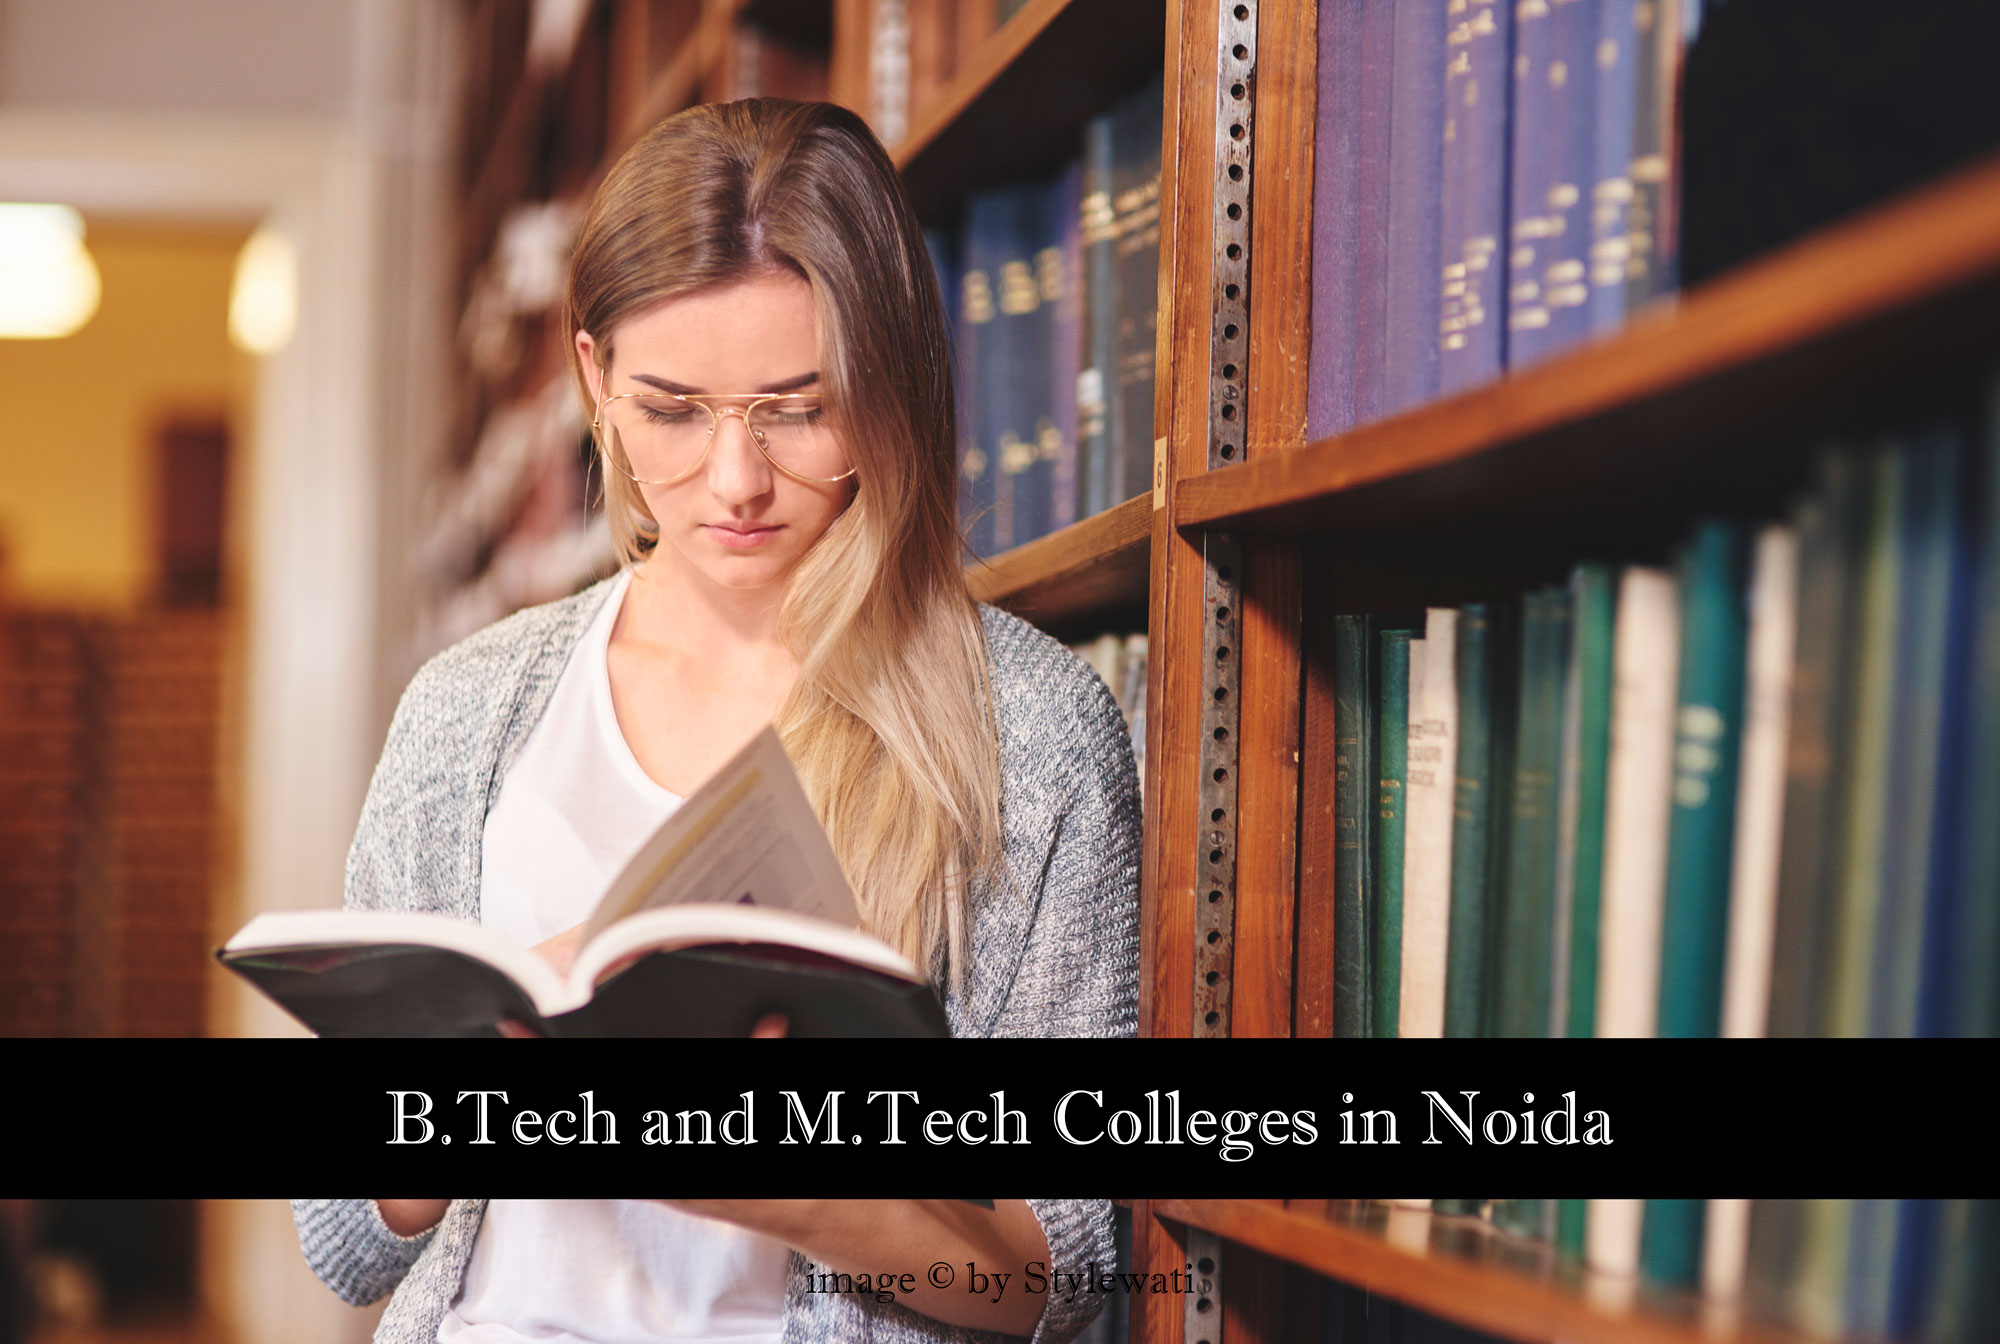 B.Tech and M.Tech Colleges in Noida